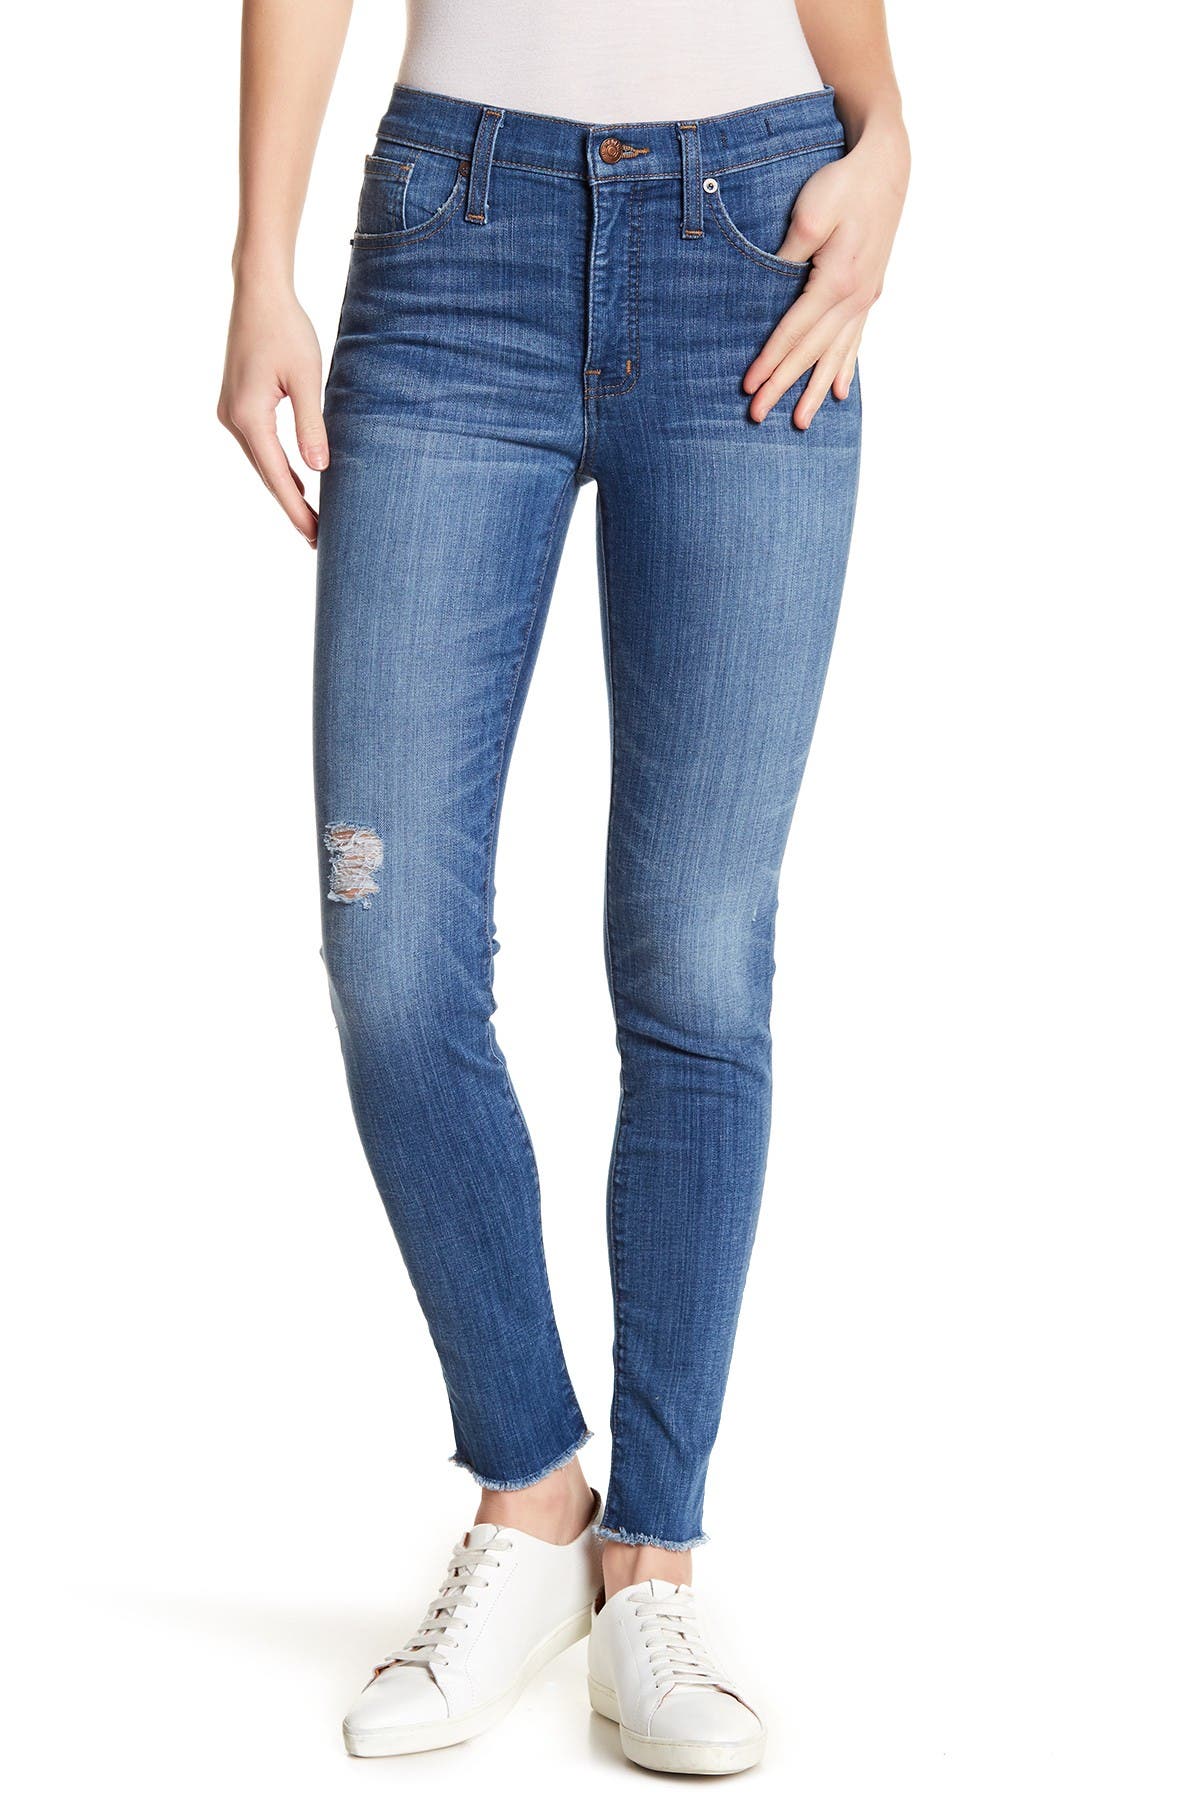 madewell jeans for women